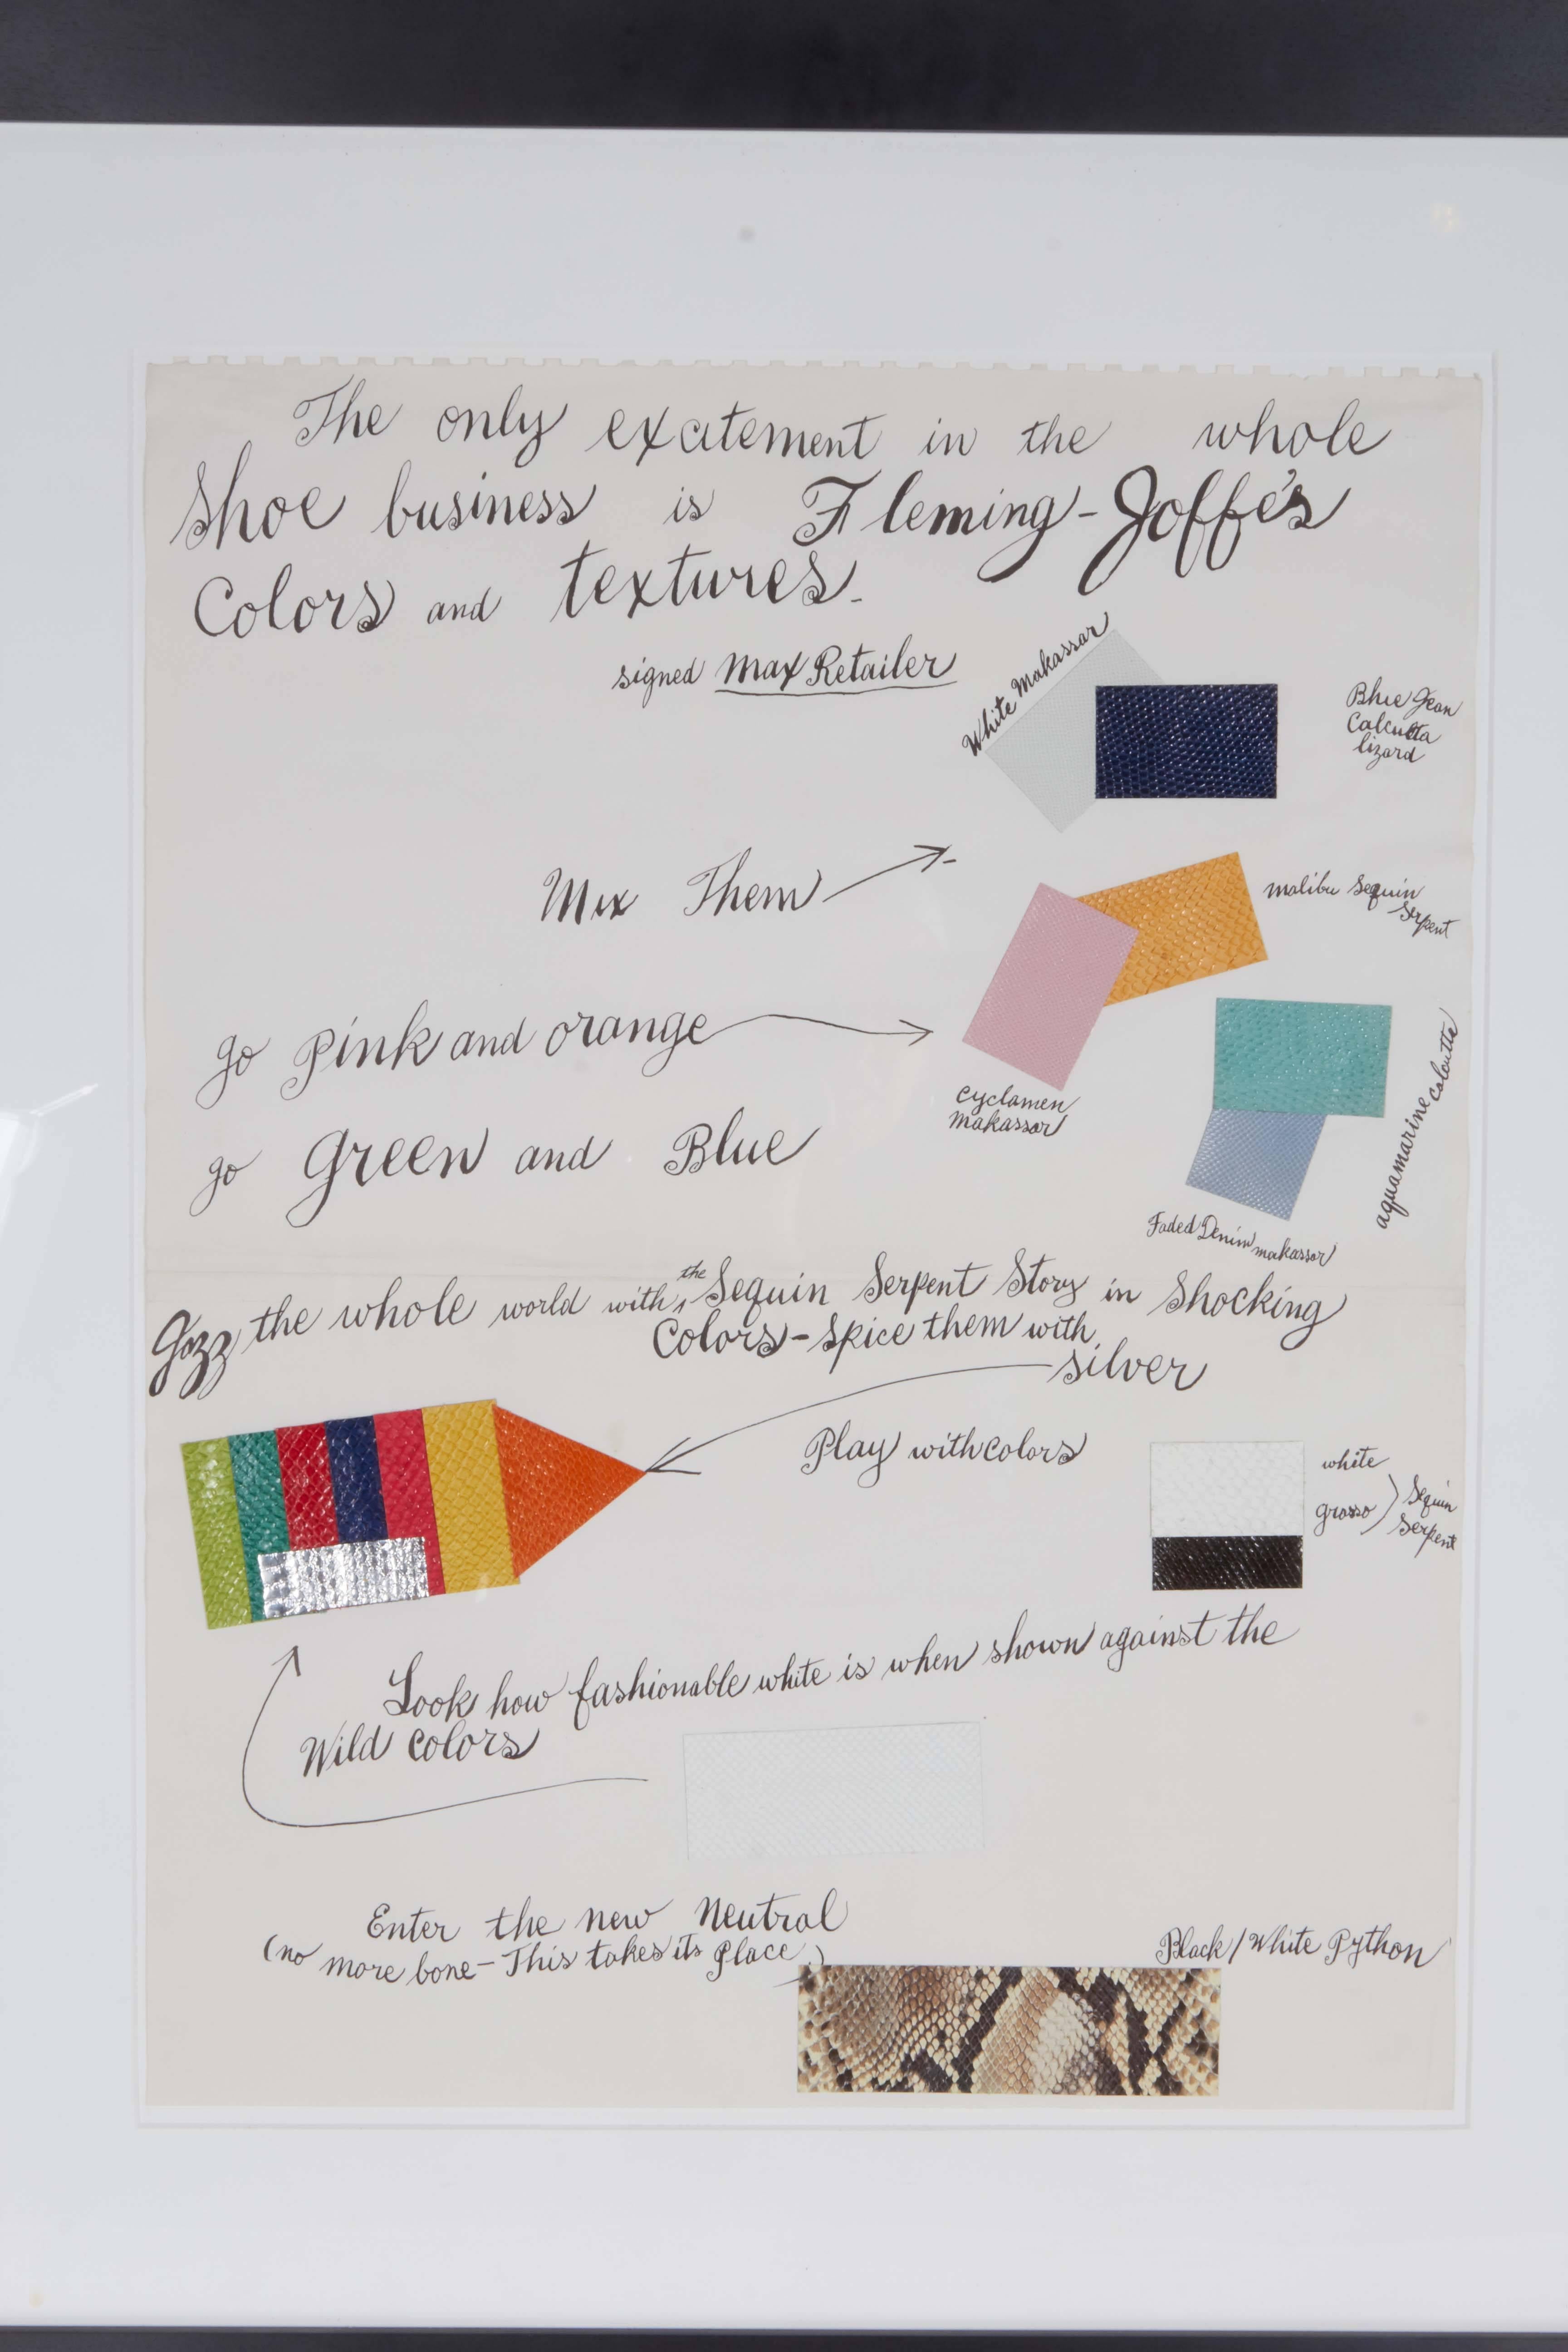 Andy Warhol (1928-1987).
1960, Untitled (Fleming-Joffe Colors).
Offset lithograph with collage of colored leather samples.
23 3/4 in. high x 17 7/8 in. wide.
33 1/2 in. high x 27 1/2 in. wide, framed.
60.3 cm. high x 45.4 cm. wide. 

Inv.